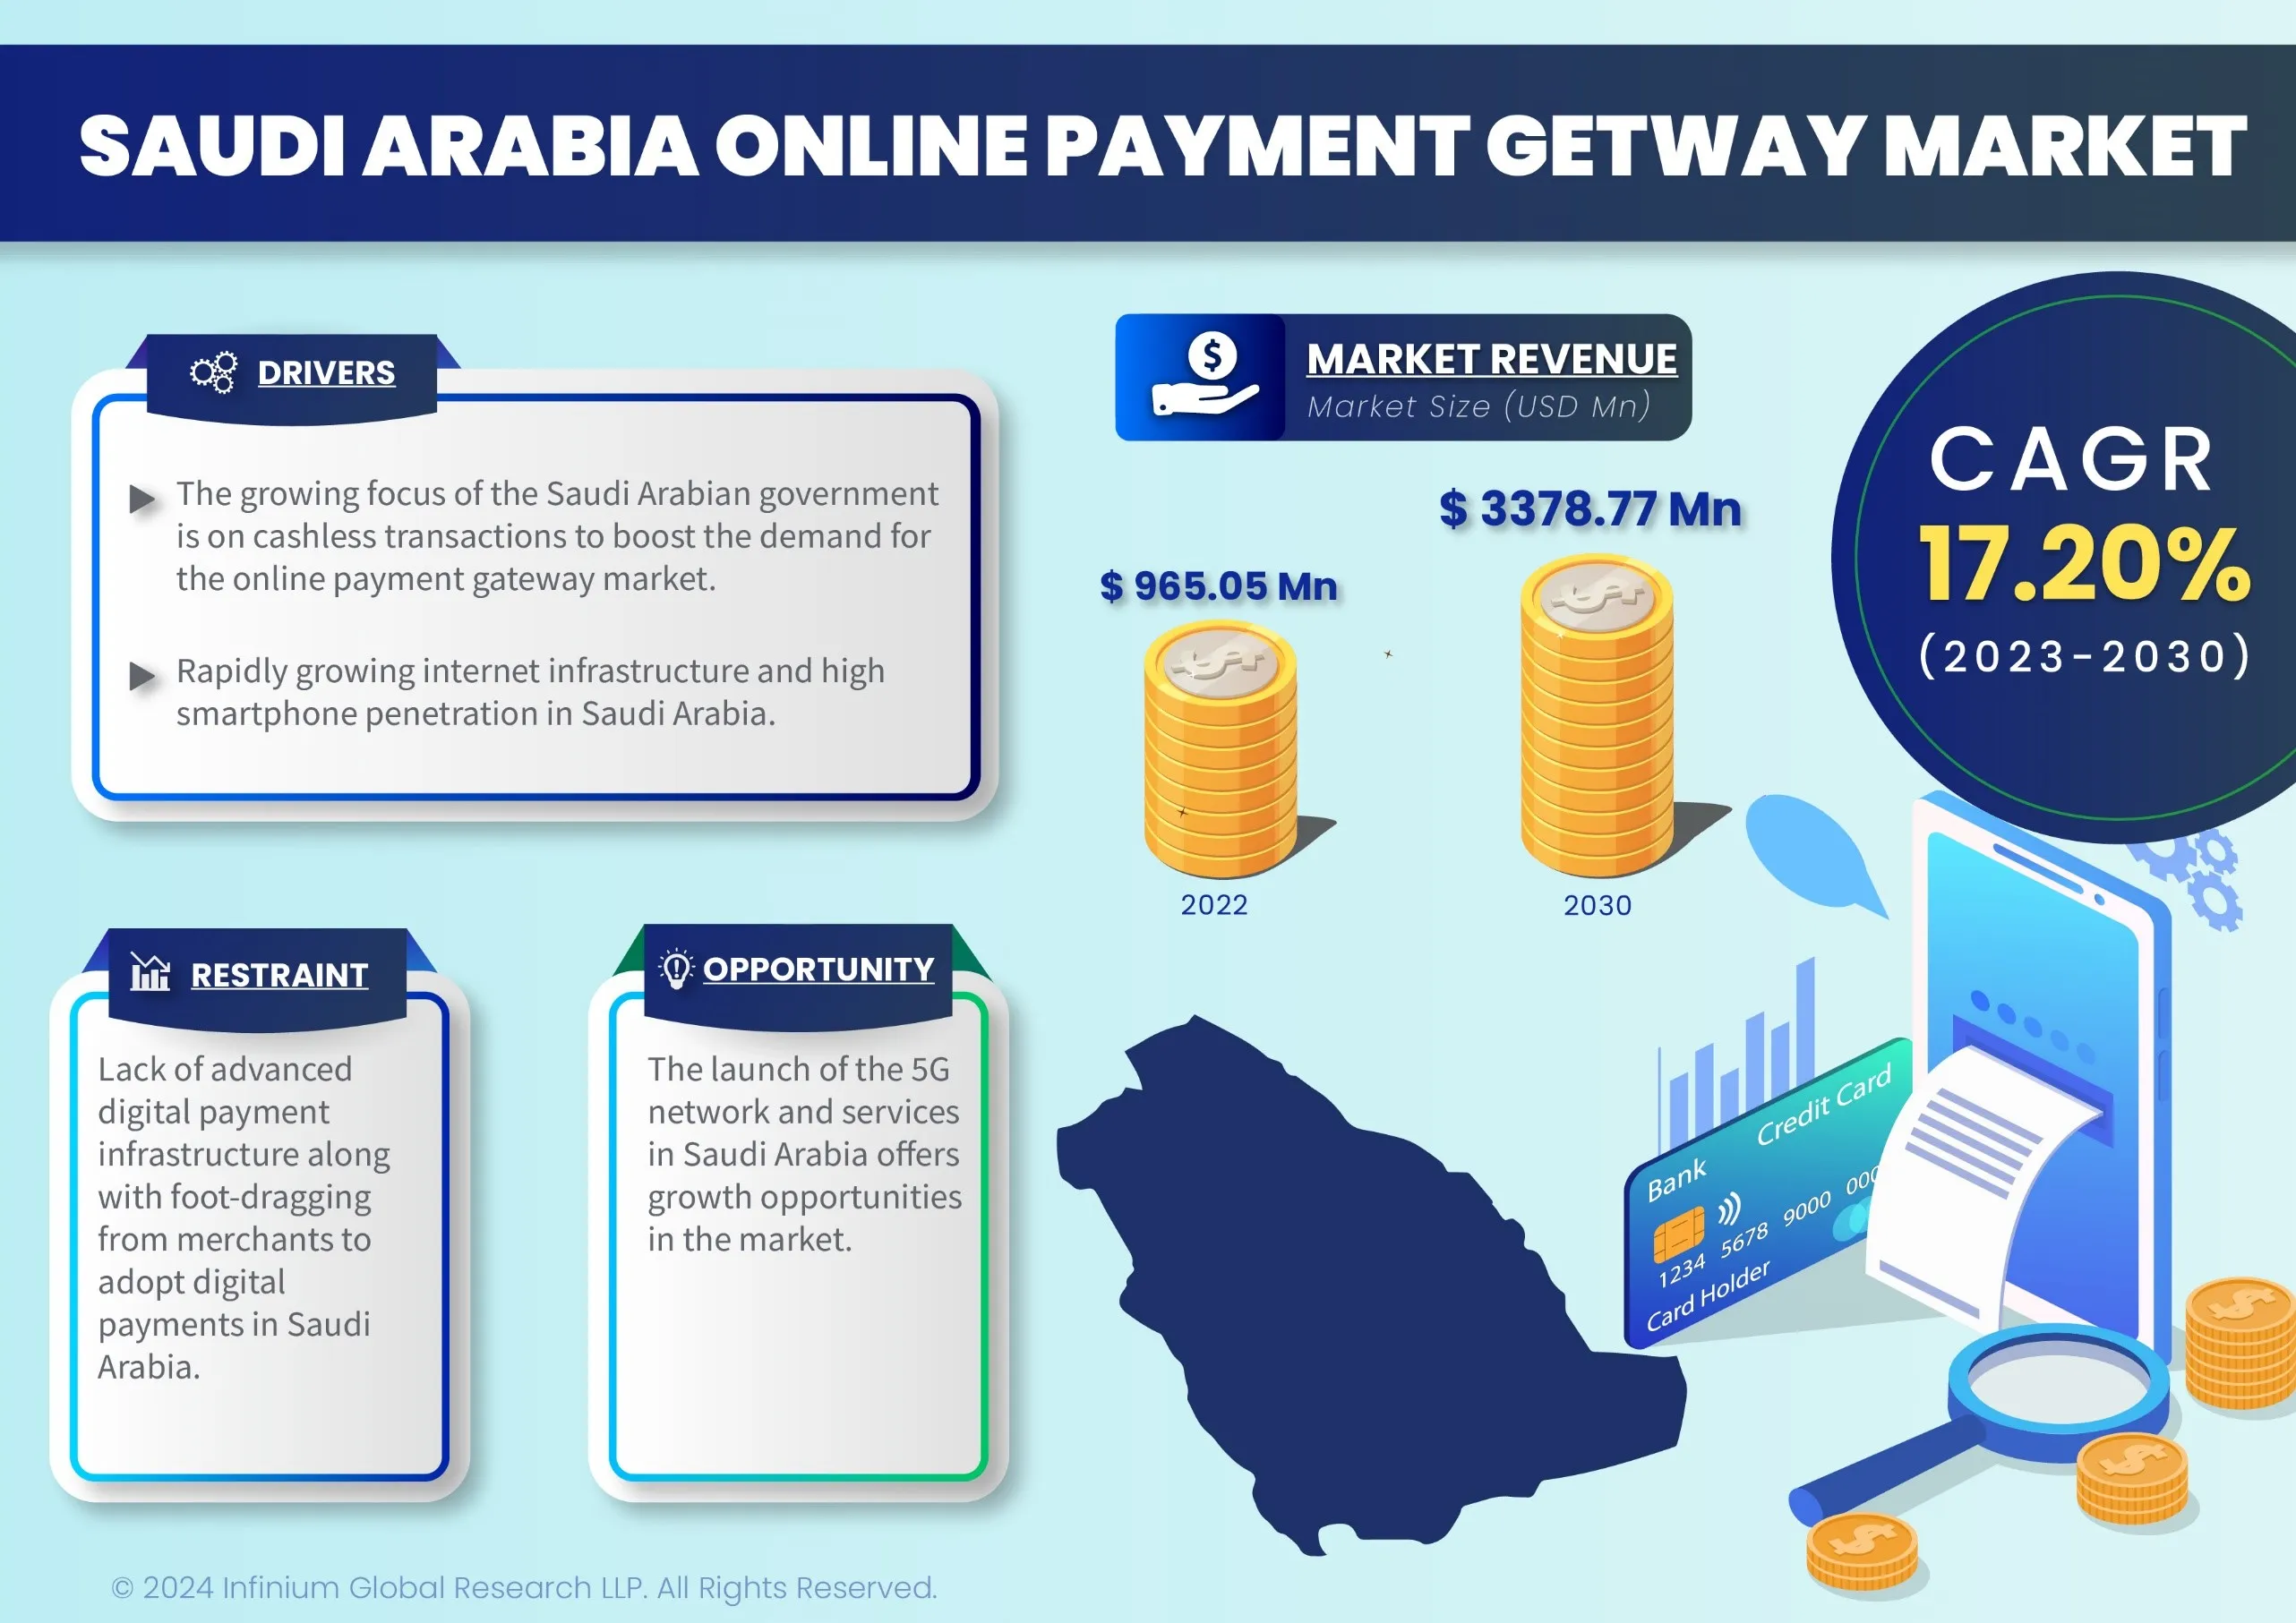 Infograph - Saudi Arabia Online Payment Gateway Market was Valued at USD 965.05 Million in 2022 and